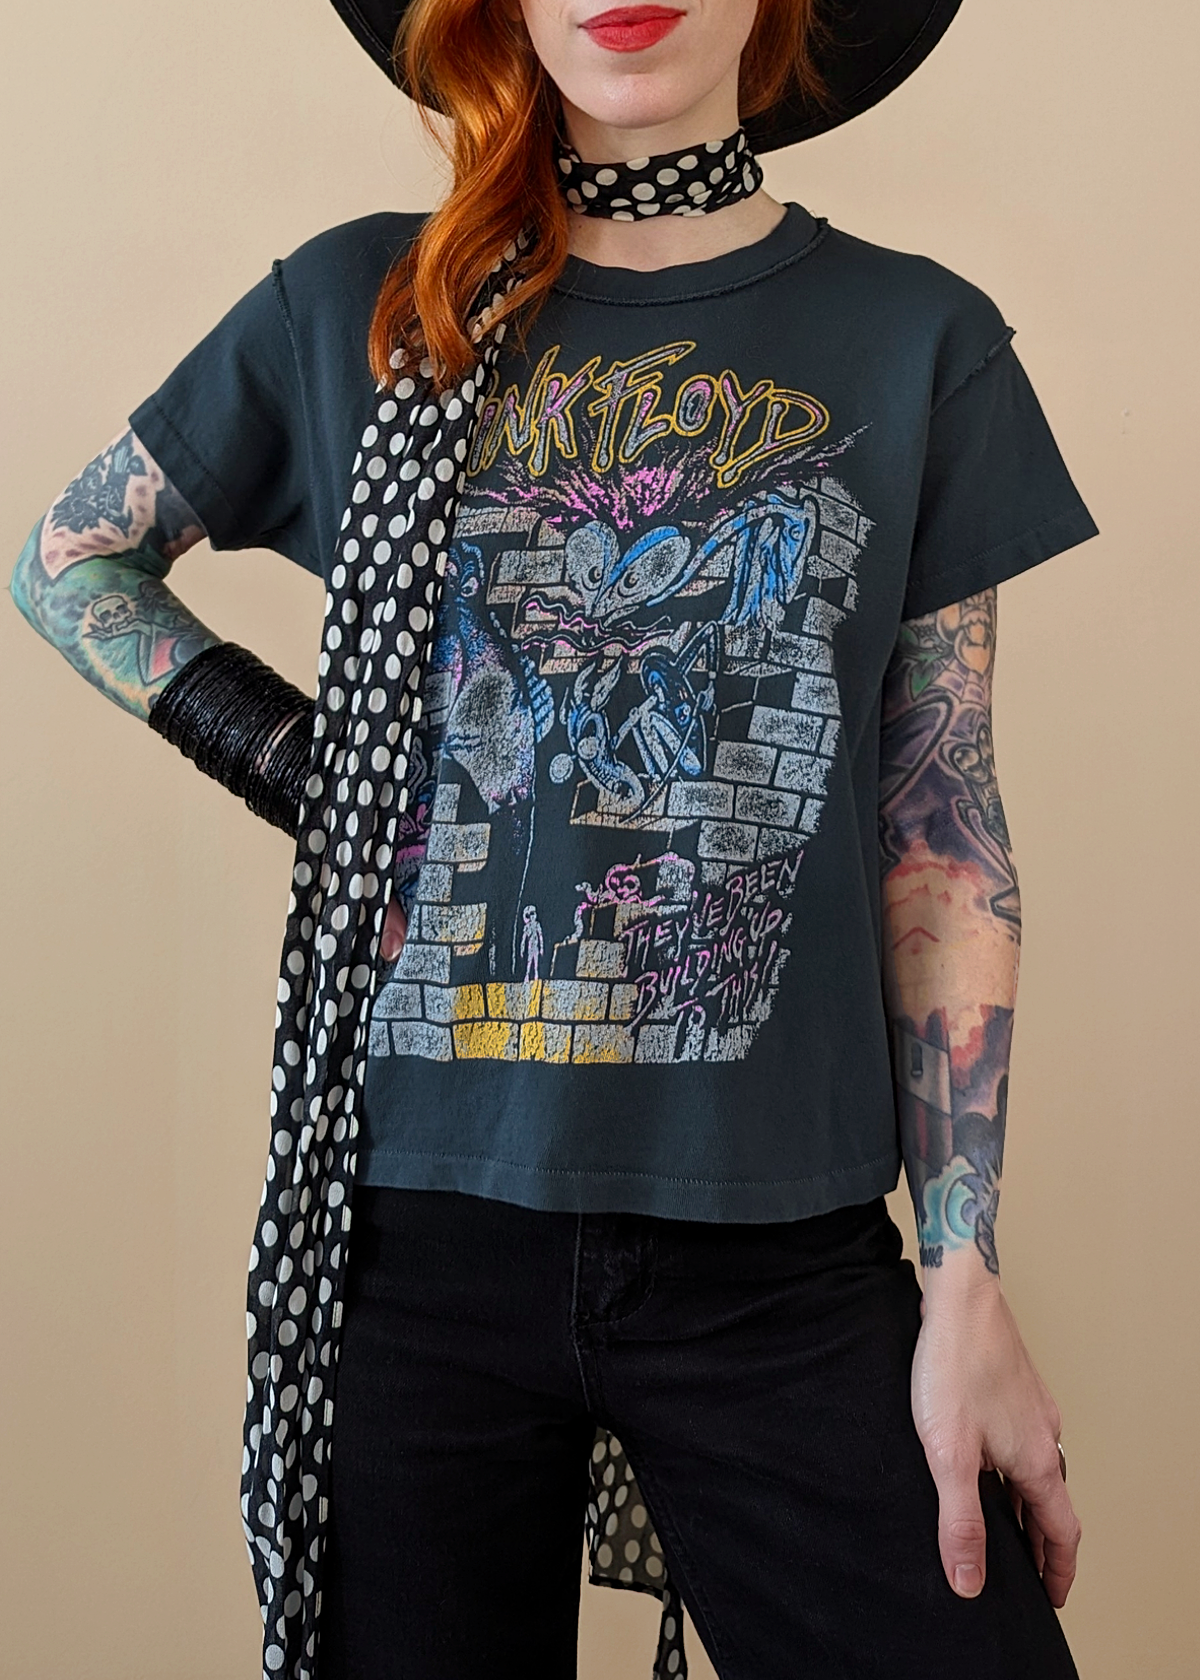 Pink Floyd Building Up The Wall Girlfriend Tee